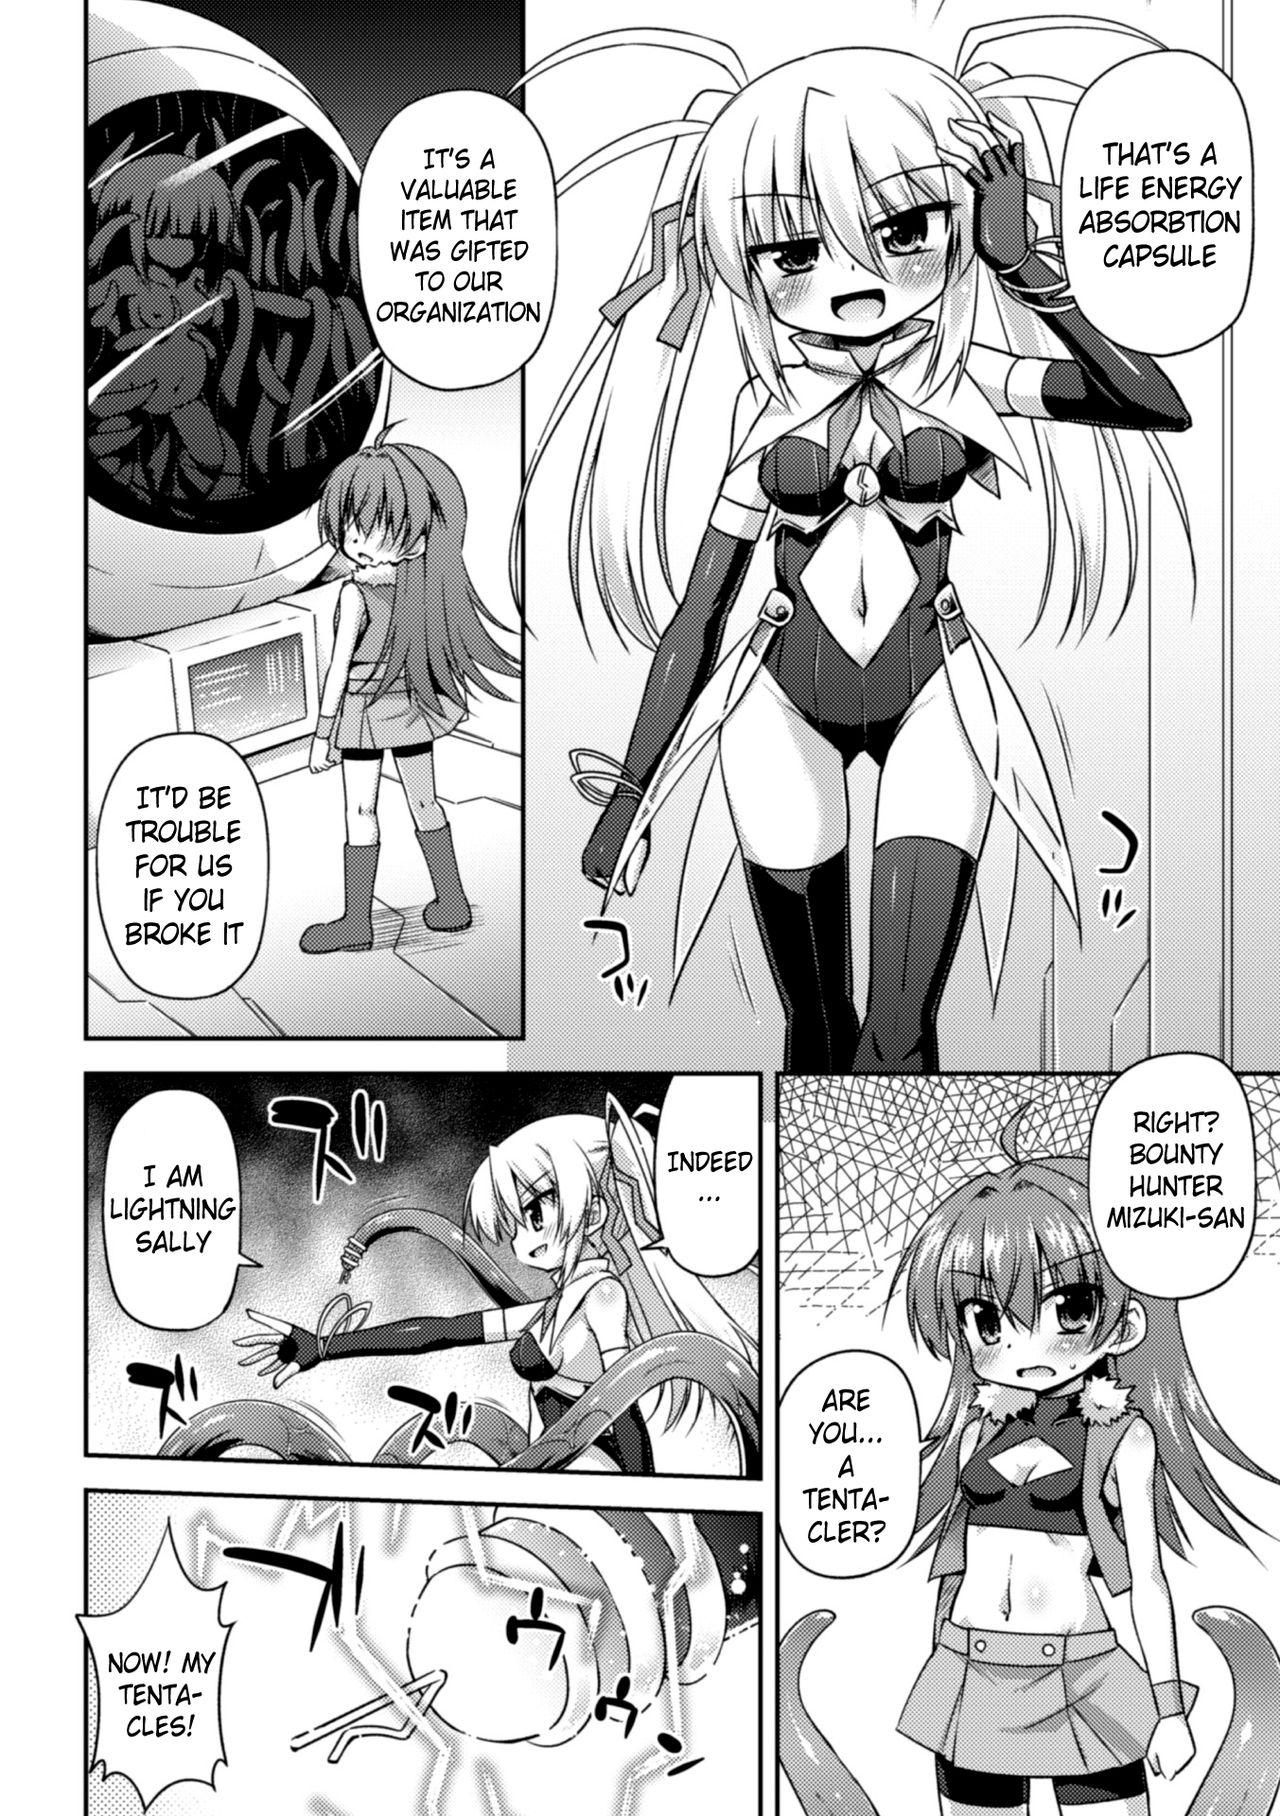 Foot Konoyo wa Subete Tentacle! | This World is all Tentacles! Black Girl - Page 8